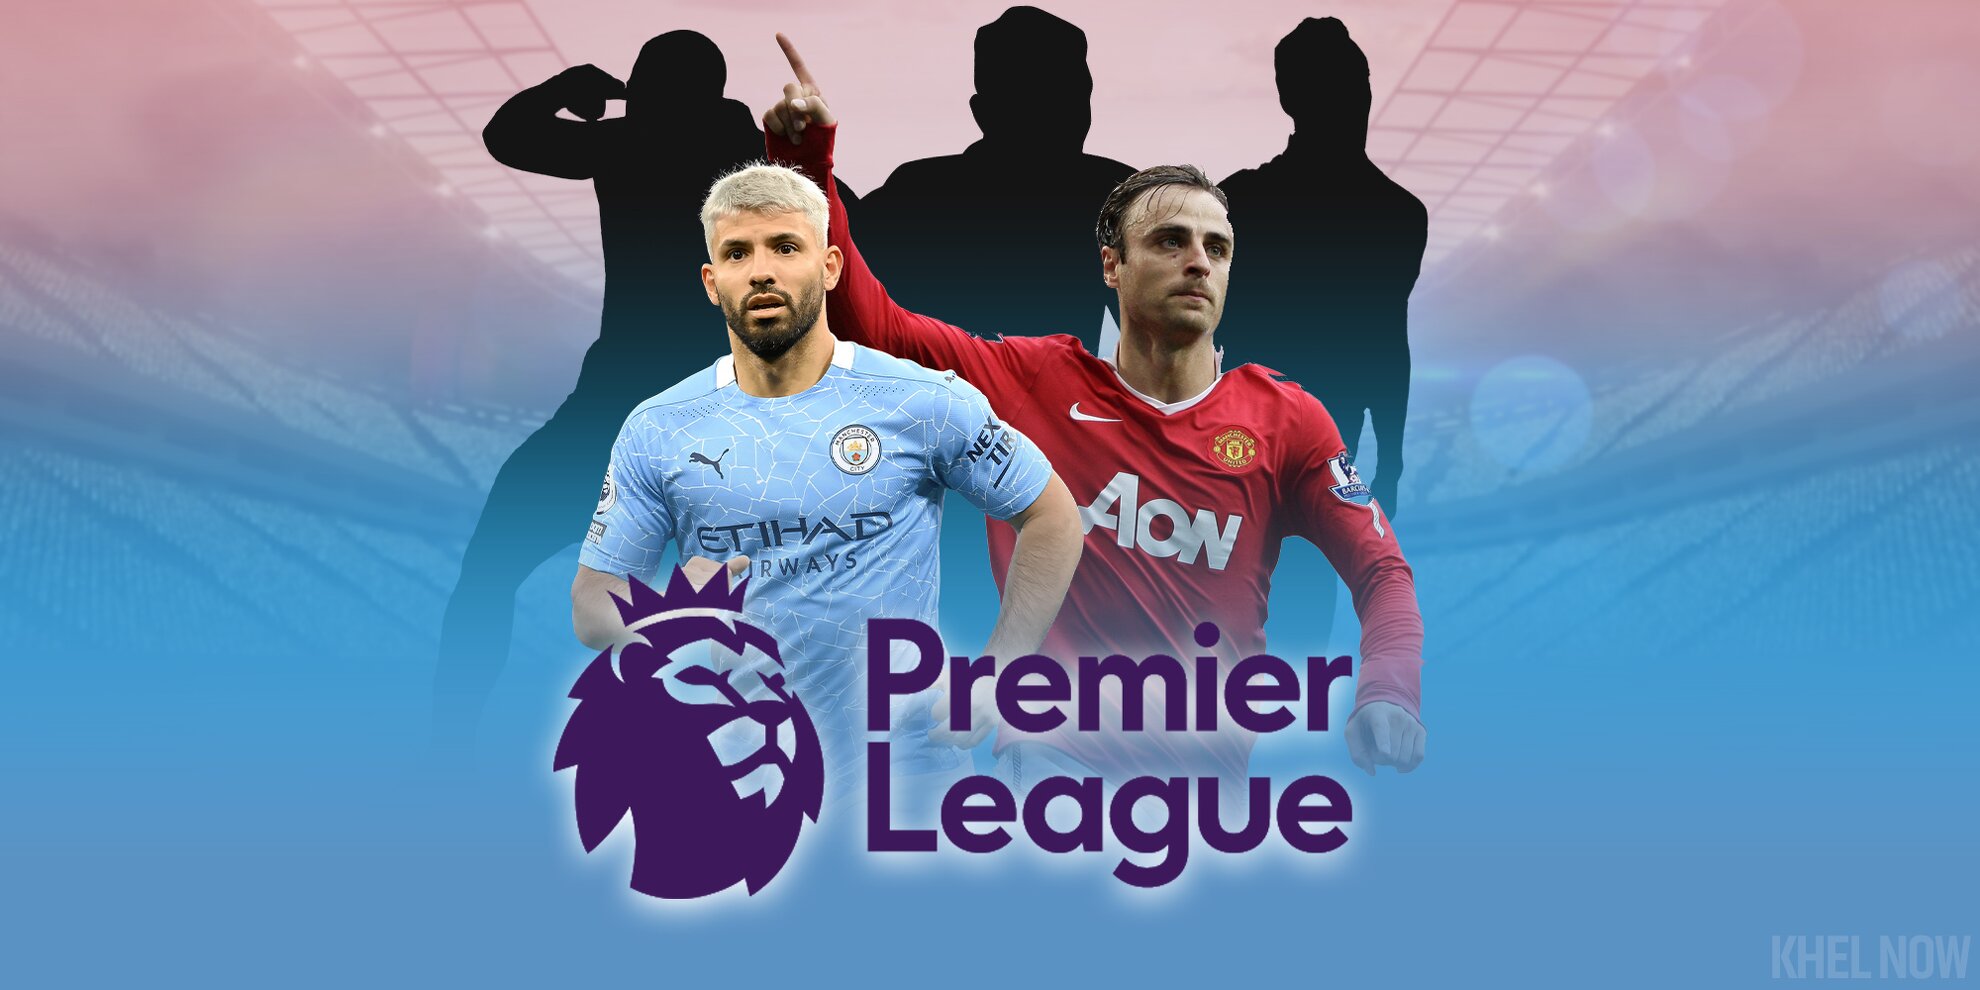 Players with the most goals in a single Premier League match